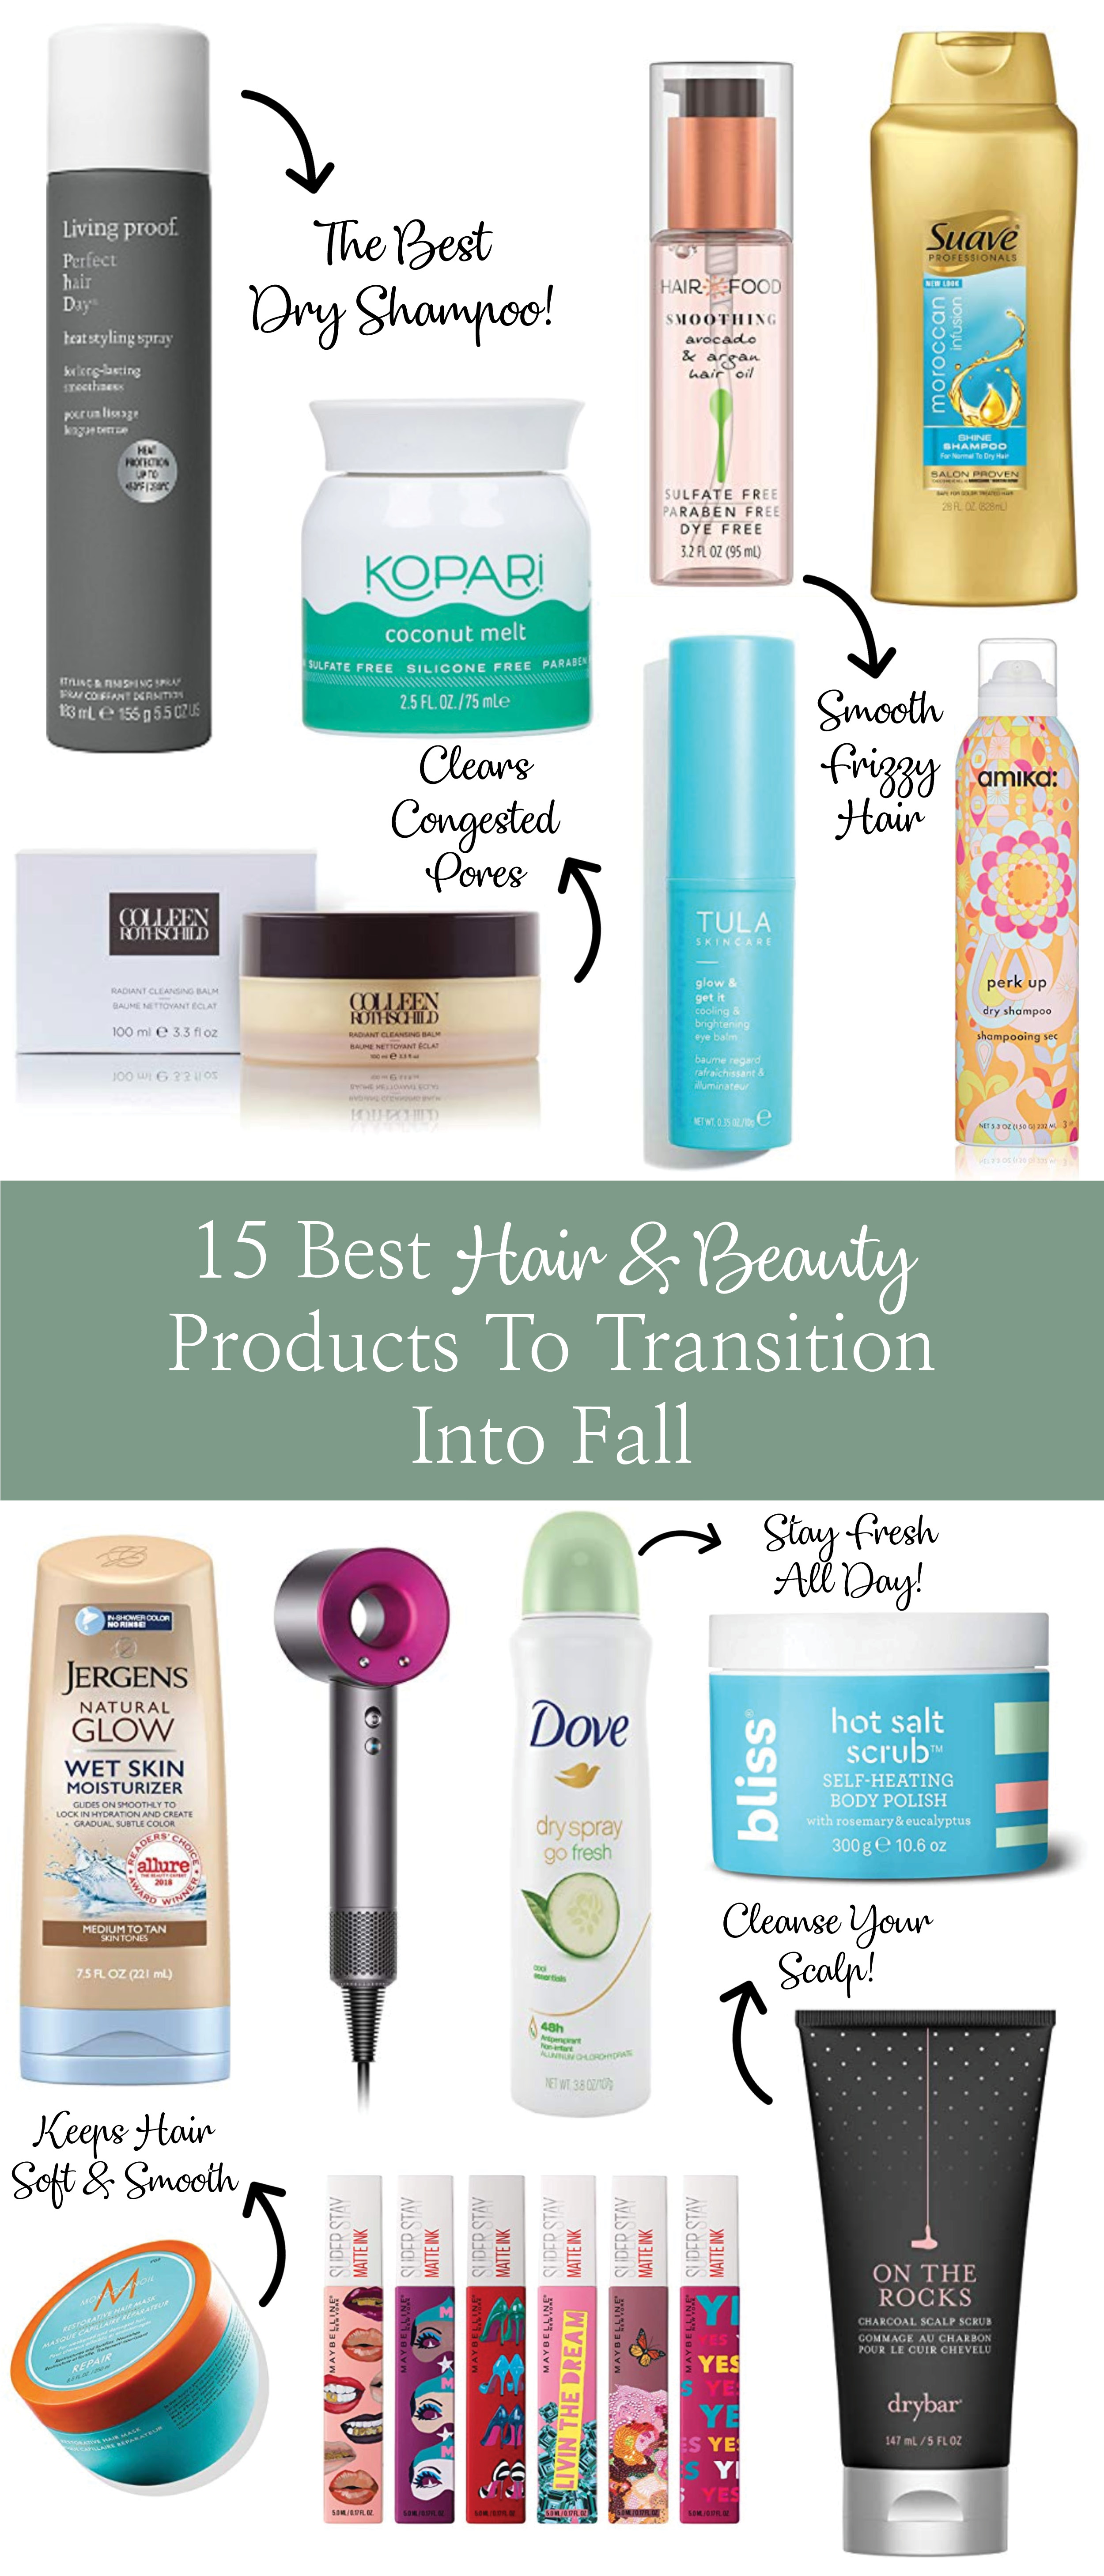 Best hair and beauty products for fall, featured by top US beauty blog, Walking in Memphis in High Heels